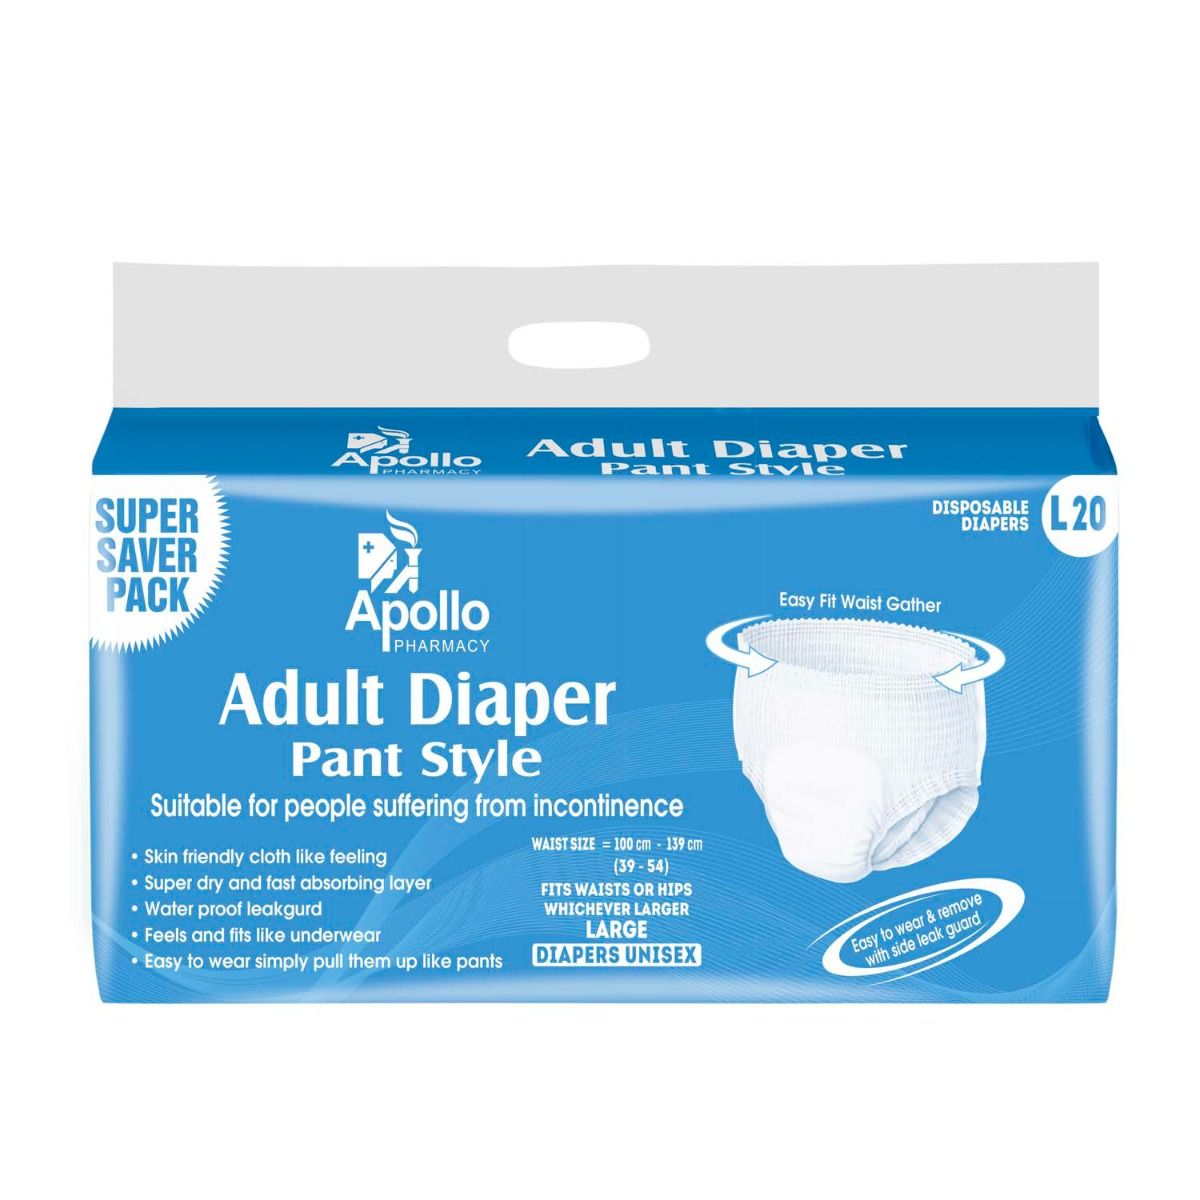 Apollo Life Adult Diaper Pants Large, 20 Count, Pack of 1 